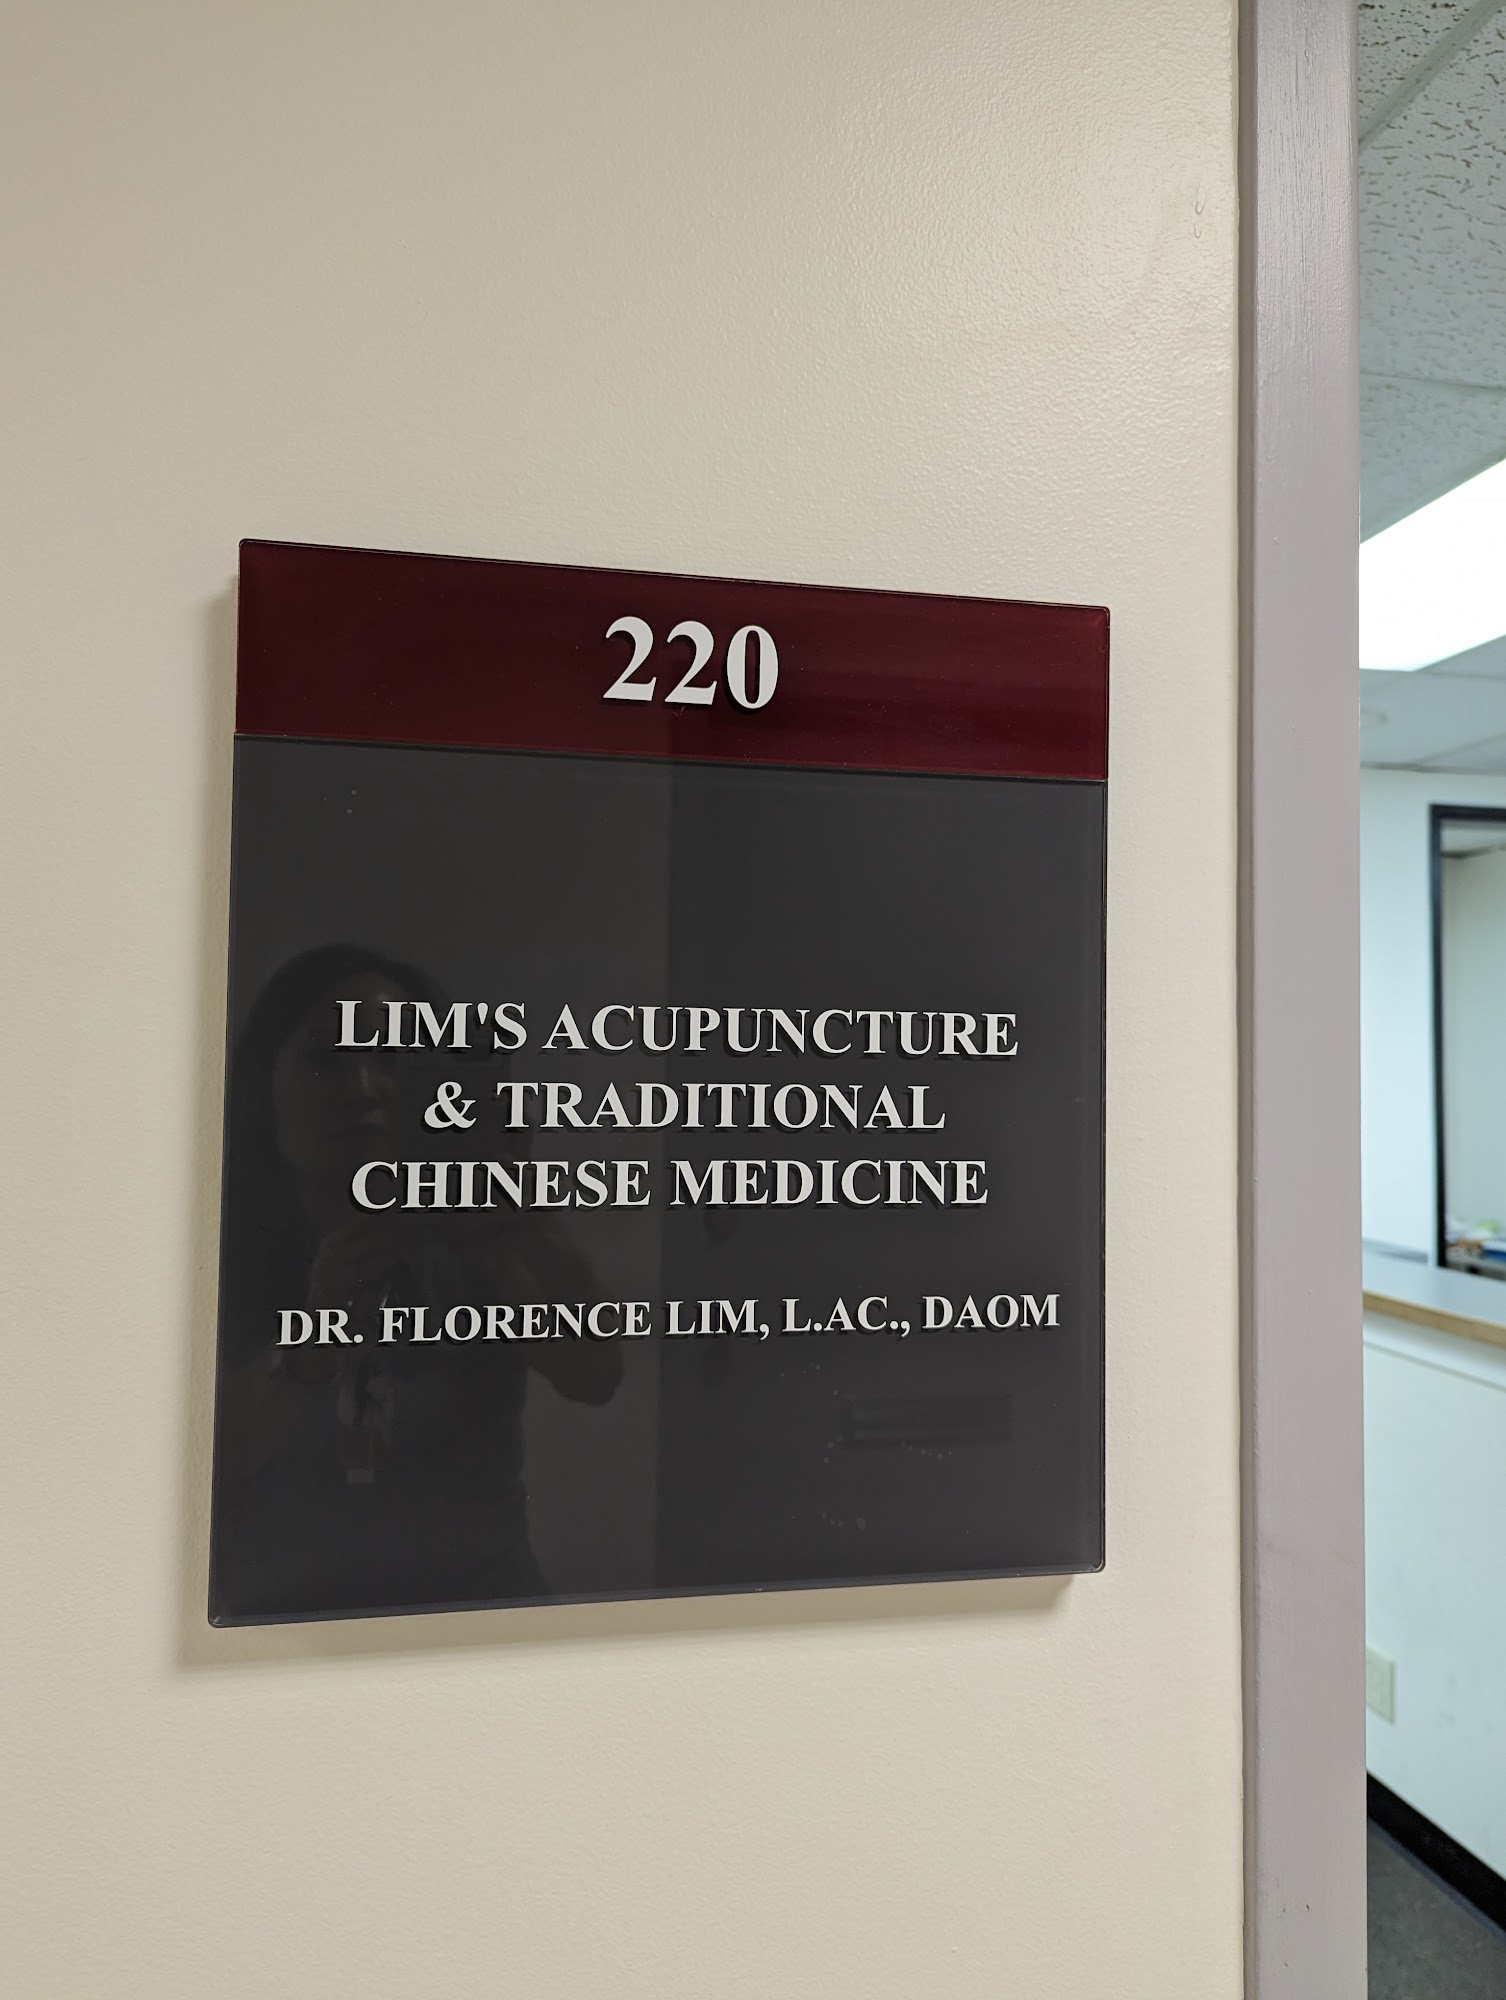 Lim's Acupuncture & Traditional Chinese Medicine